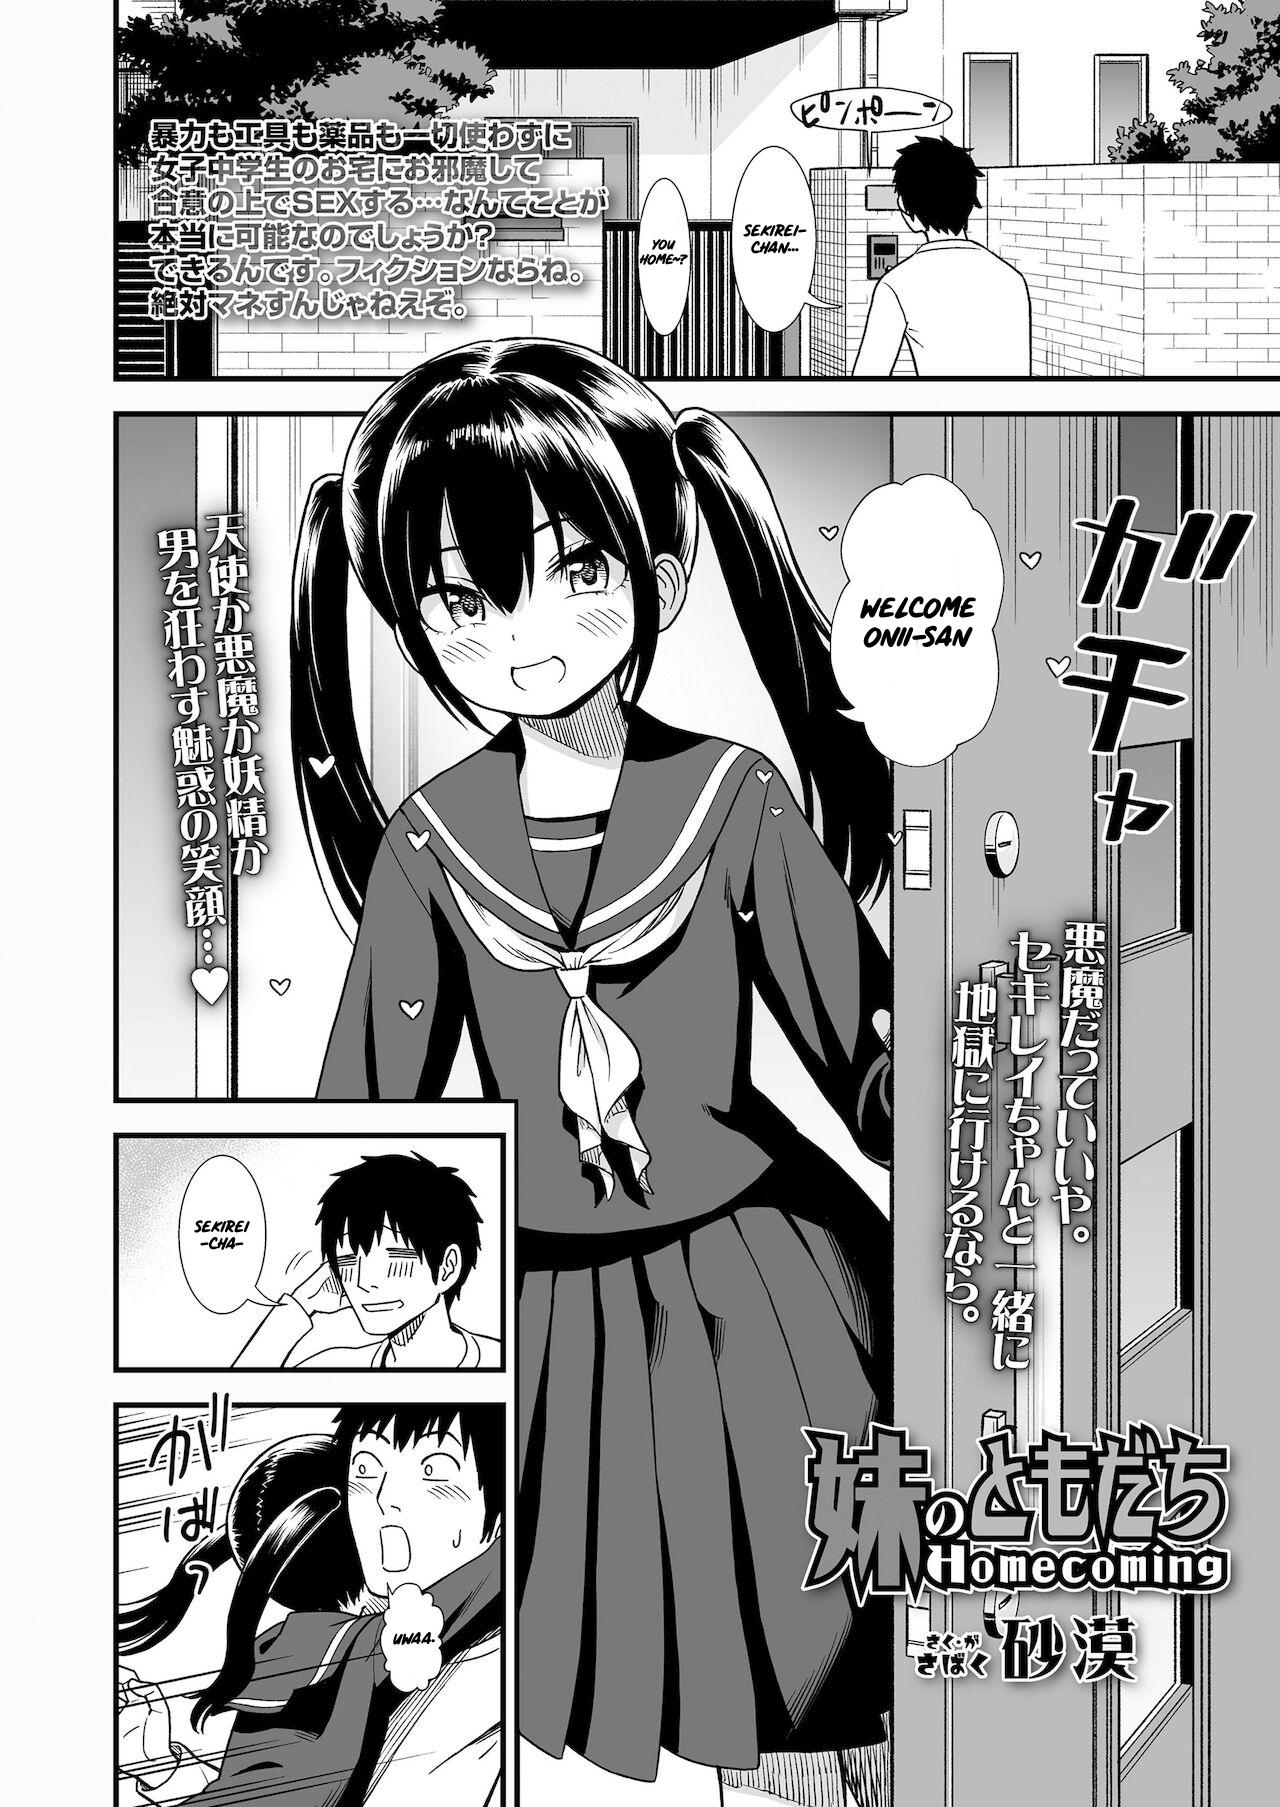 Calle Imouto no Tomodachi Homecoming | My Little Sister's Friend Homecoming Doublepenetration - Page 2